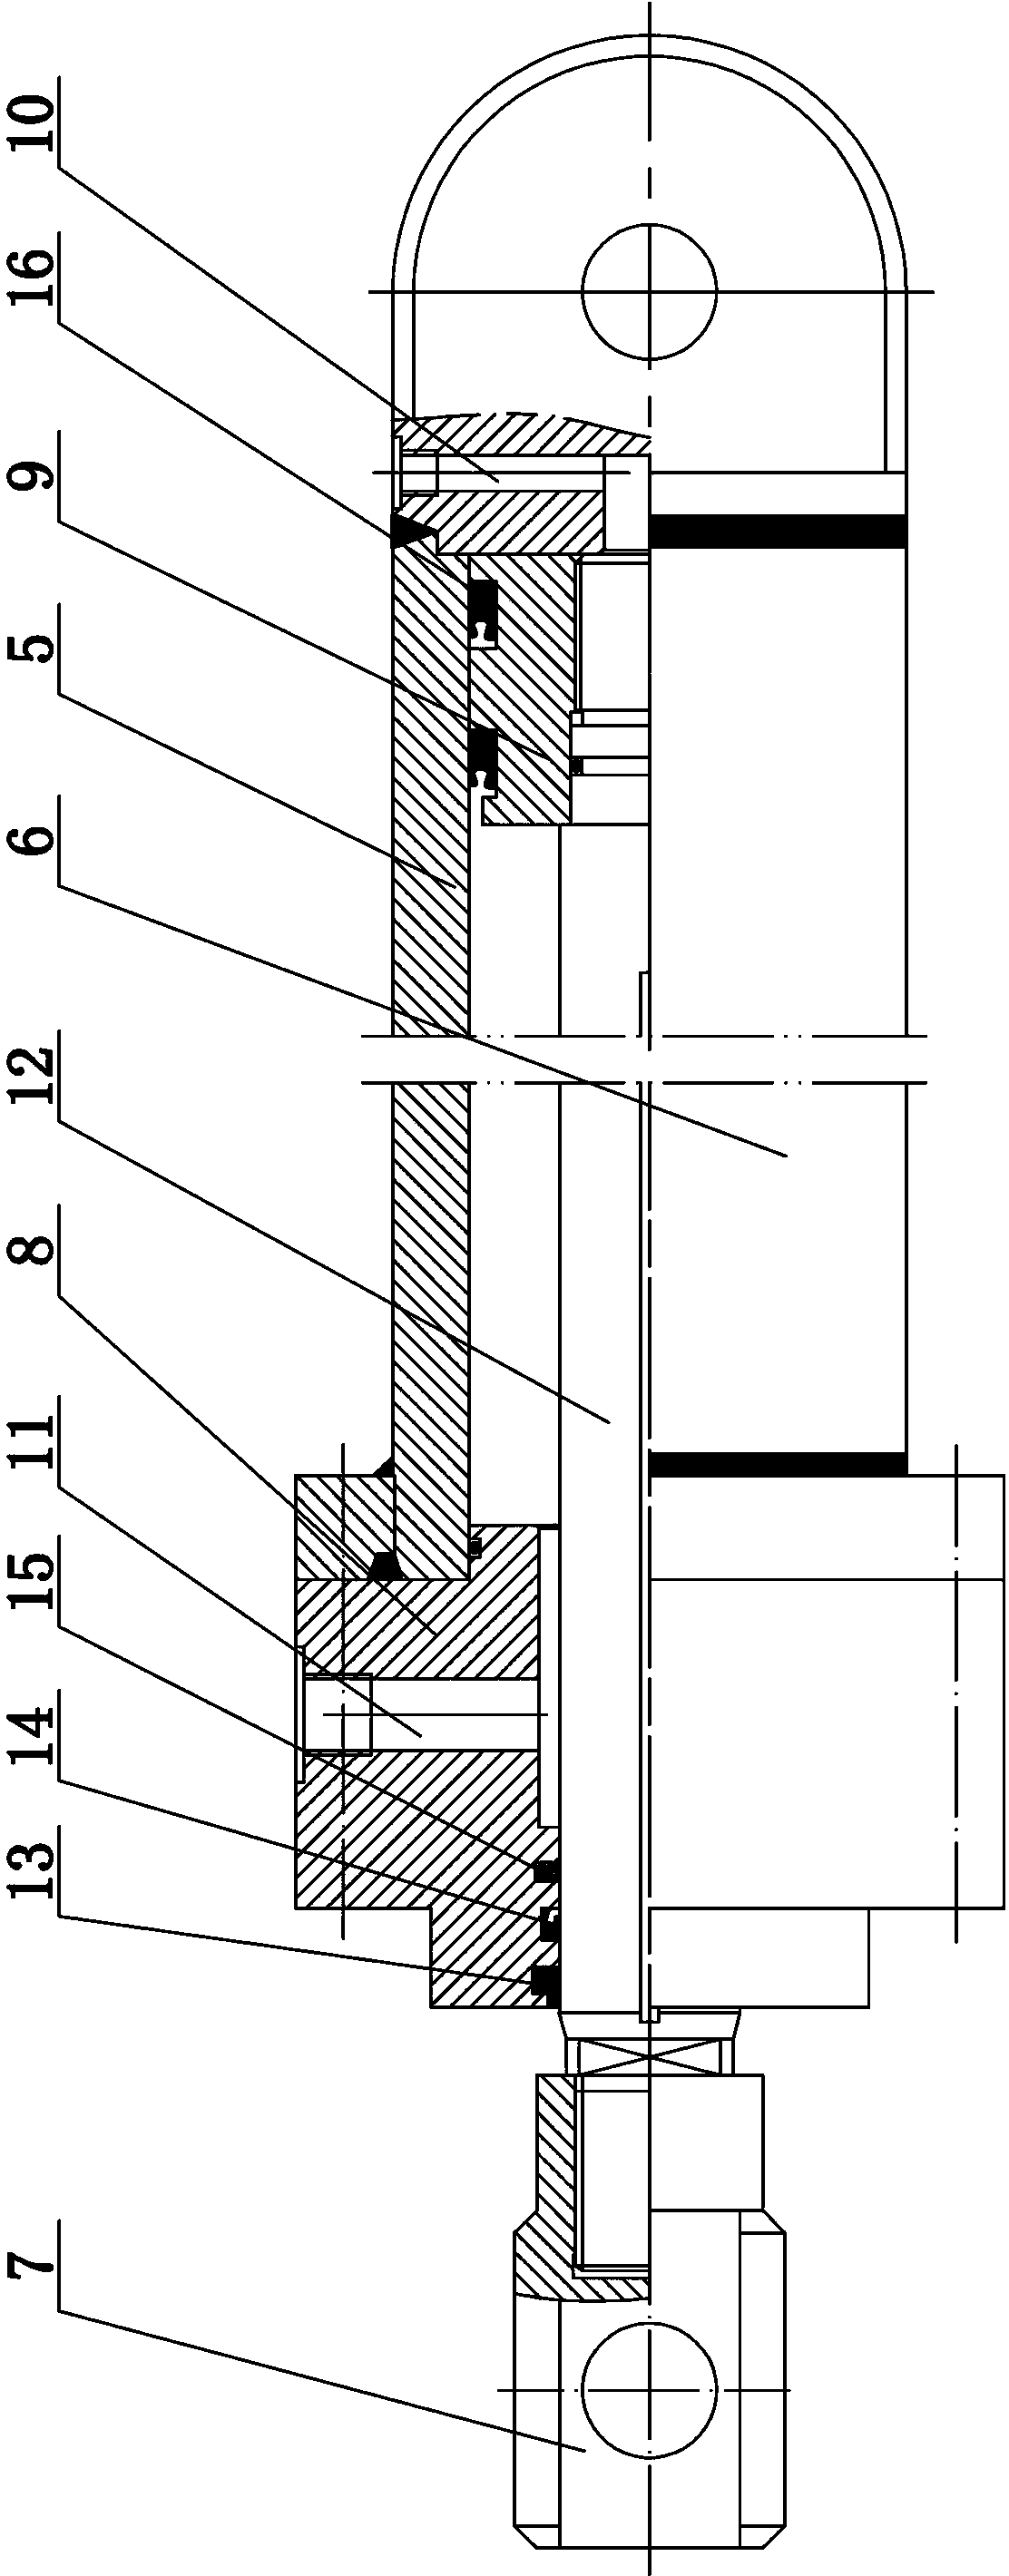 Damping type over discharge buffering device for mine hoisting system